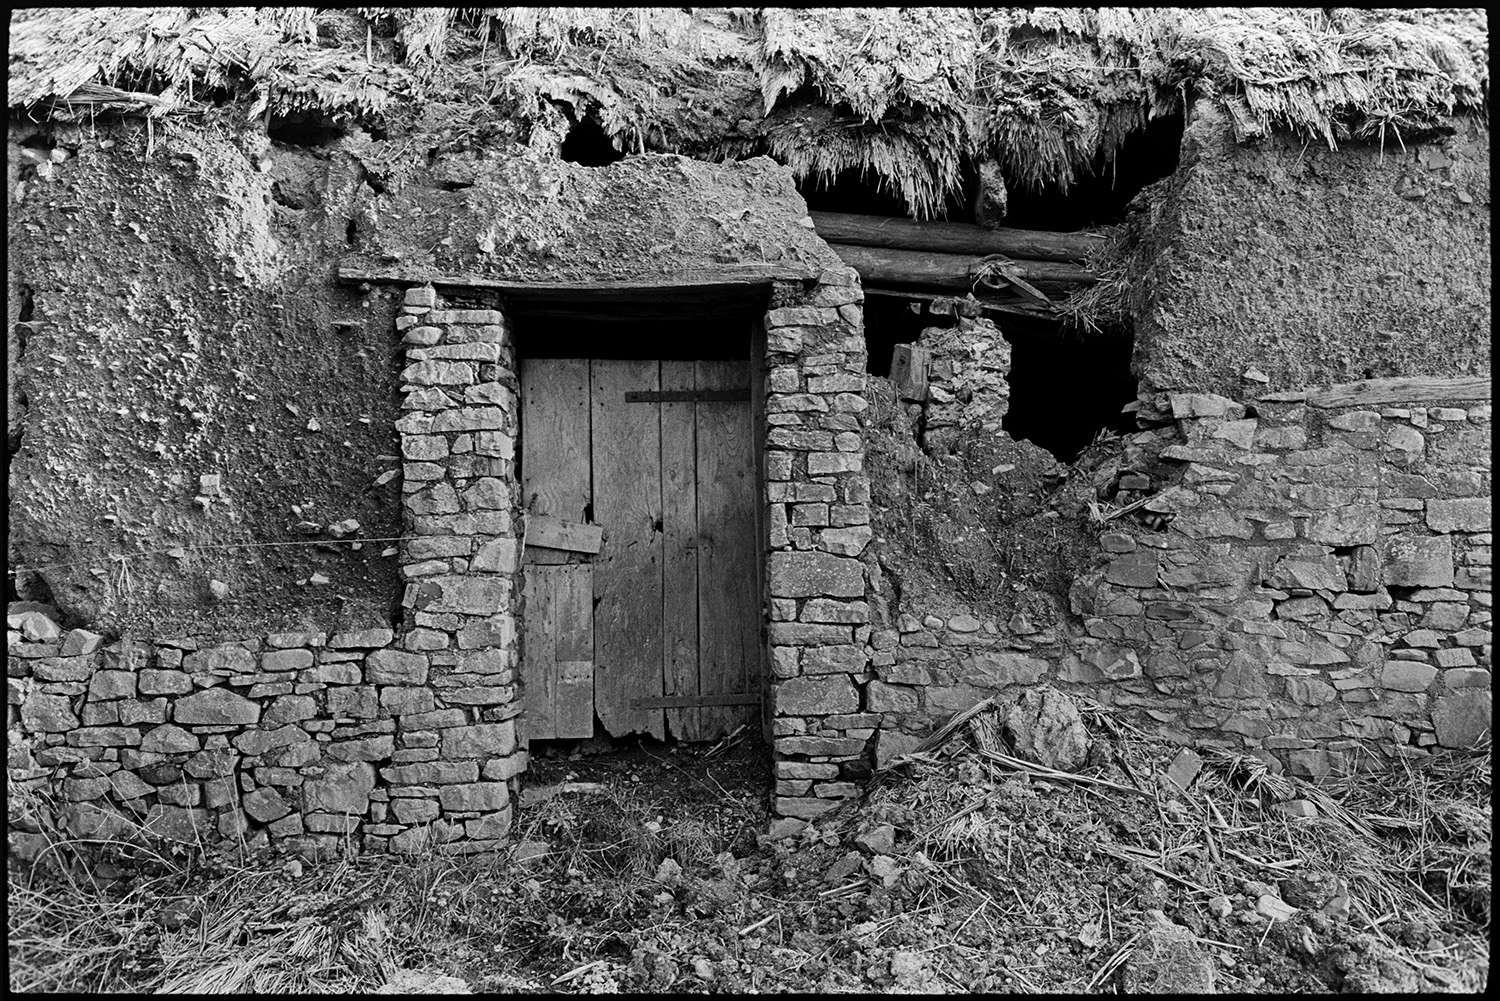 Ruined thatch and cob barns, with views from nearby stream, trees.
[The wooden door of a ruined thatch and cob barn at Middle Week, Iddesleigh.]